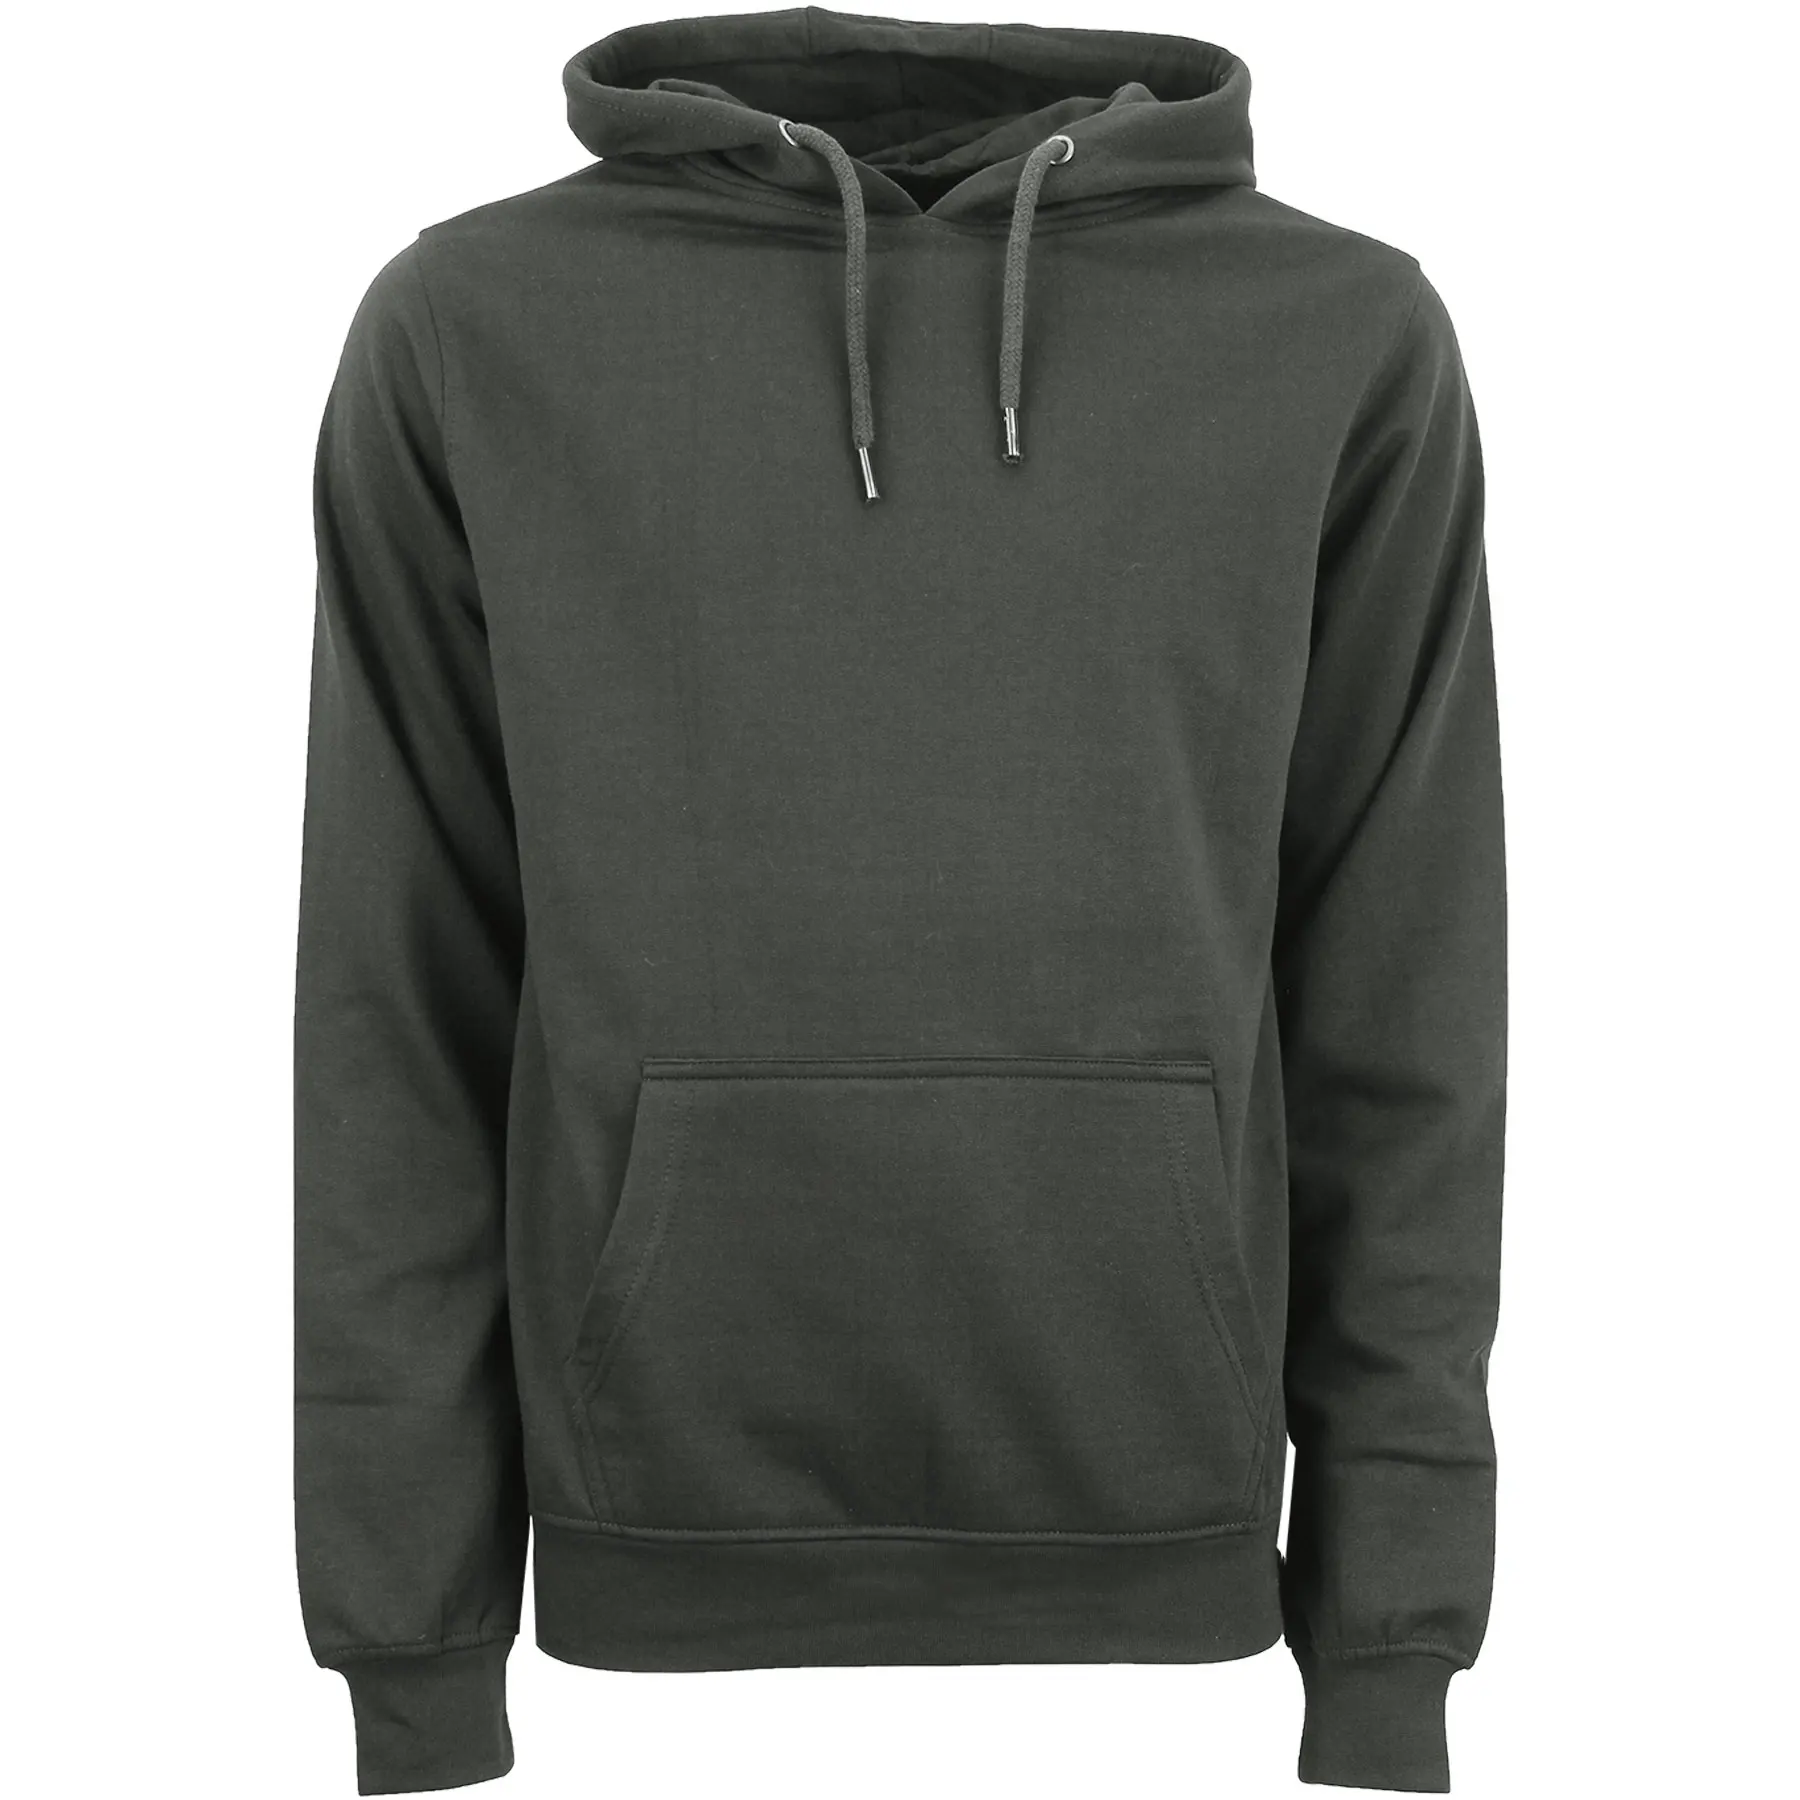 China Supplier 80 Cotton 20 Polyester Men Personalized Hoodies ...